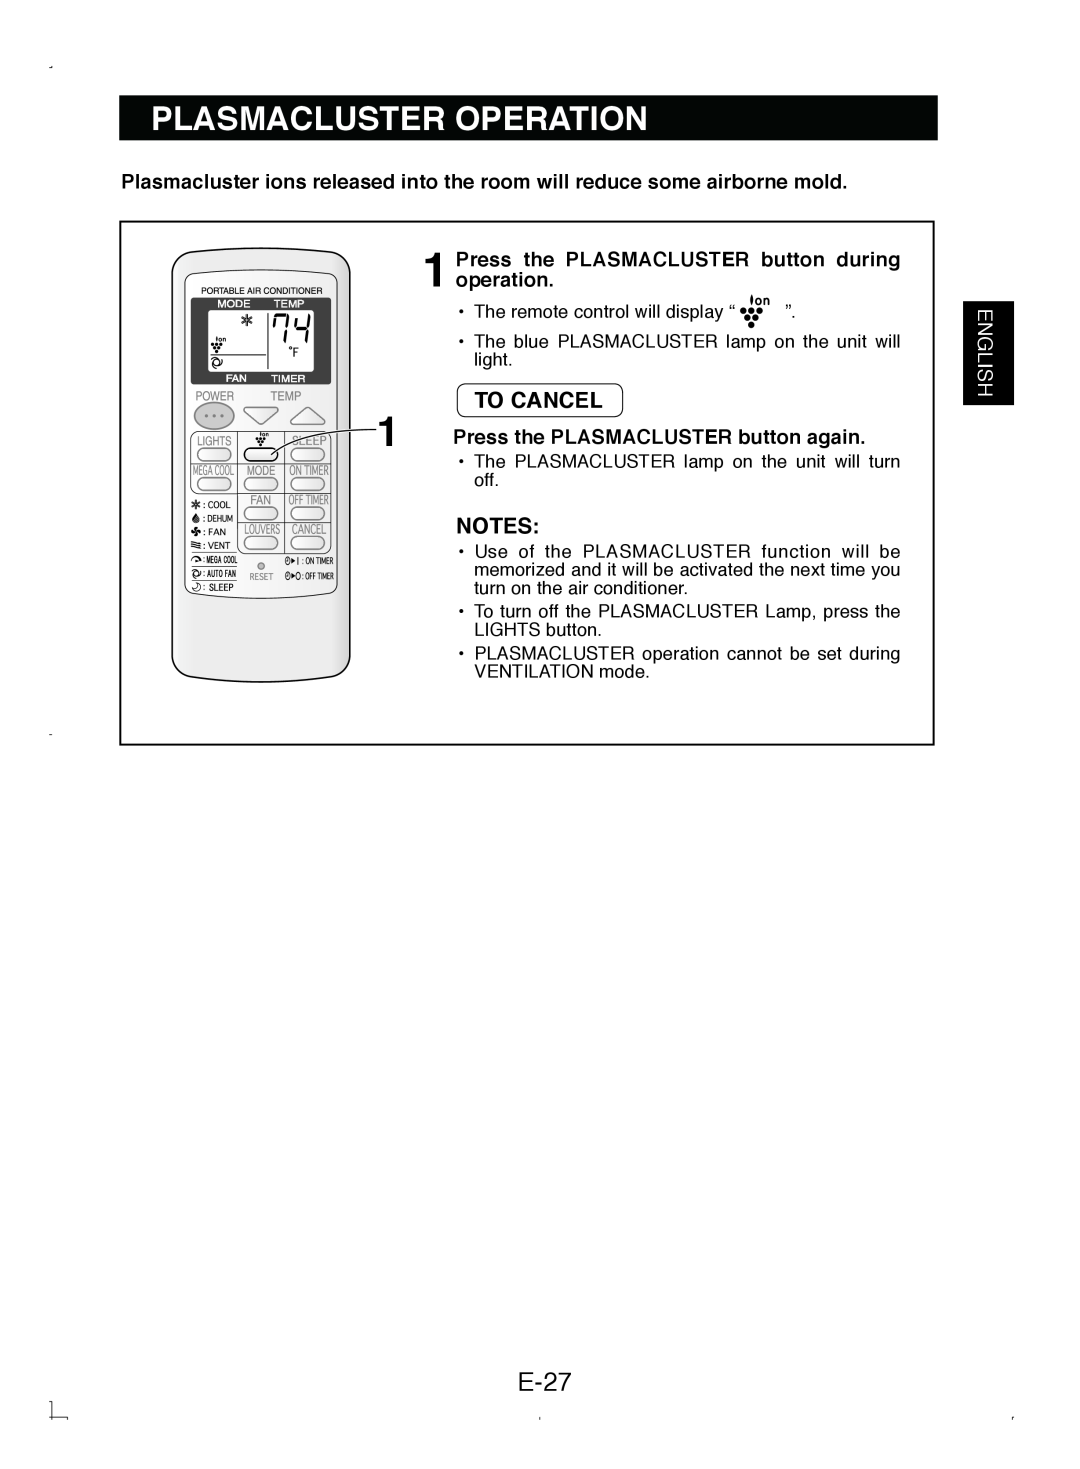 Sony CV-P12PX operation manual Plasmacluster Operation, E-27, To Cancel, English 